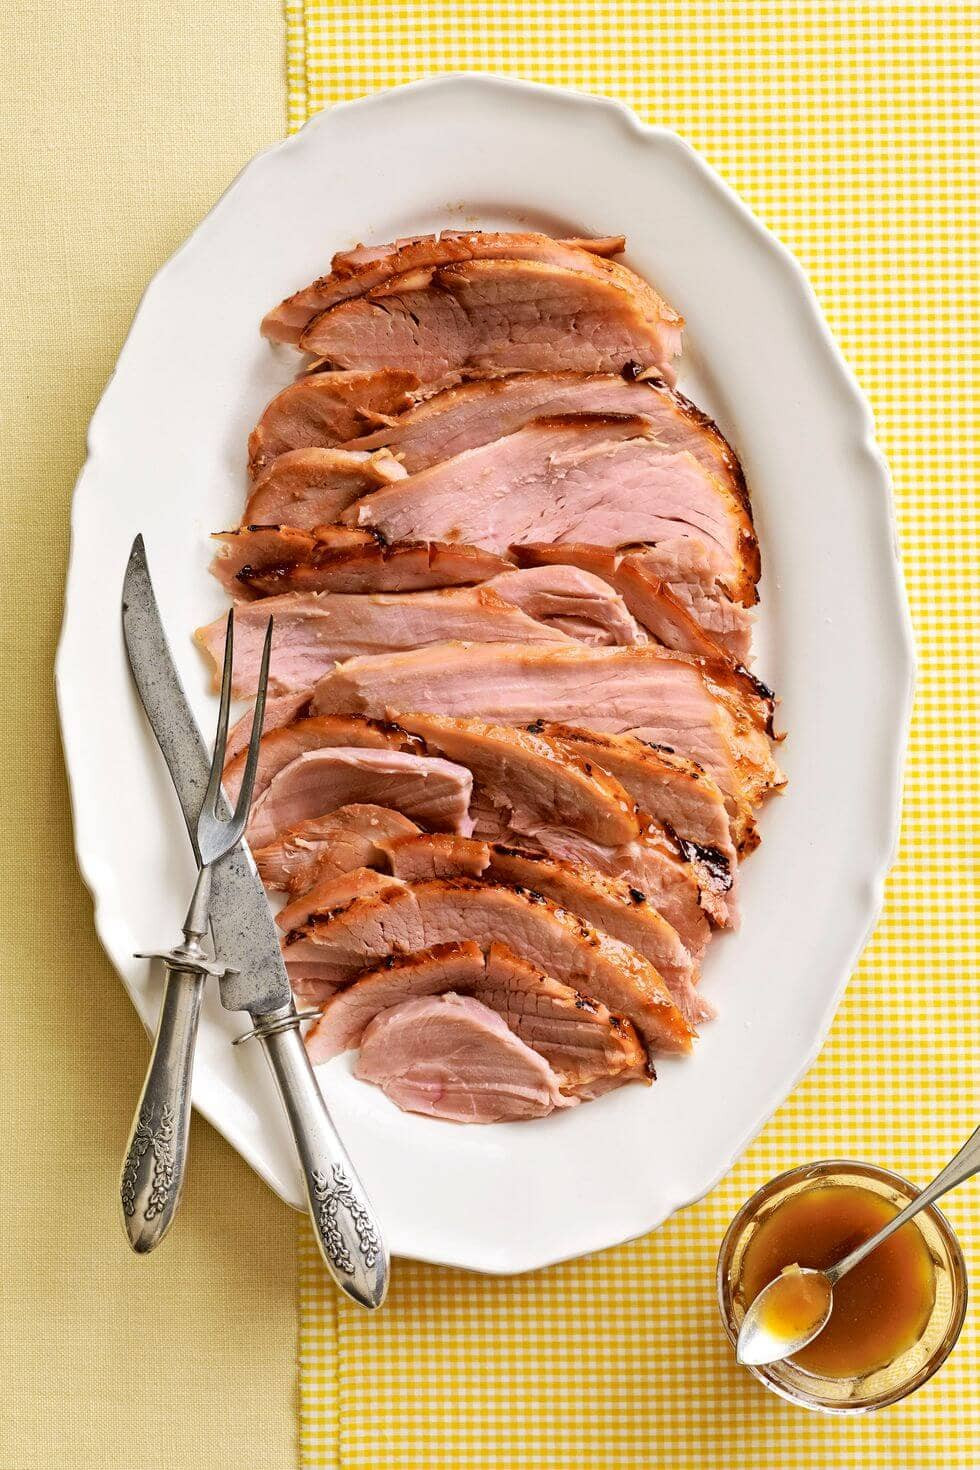 Meat For Easter Dinner
 27 Yummy Easter Dinner Ideas to Wow Your Guests